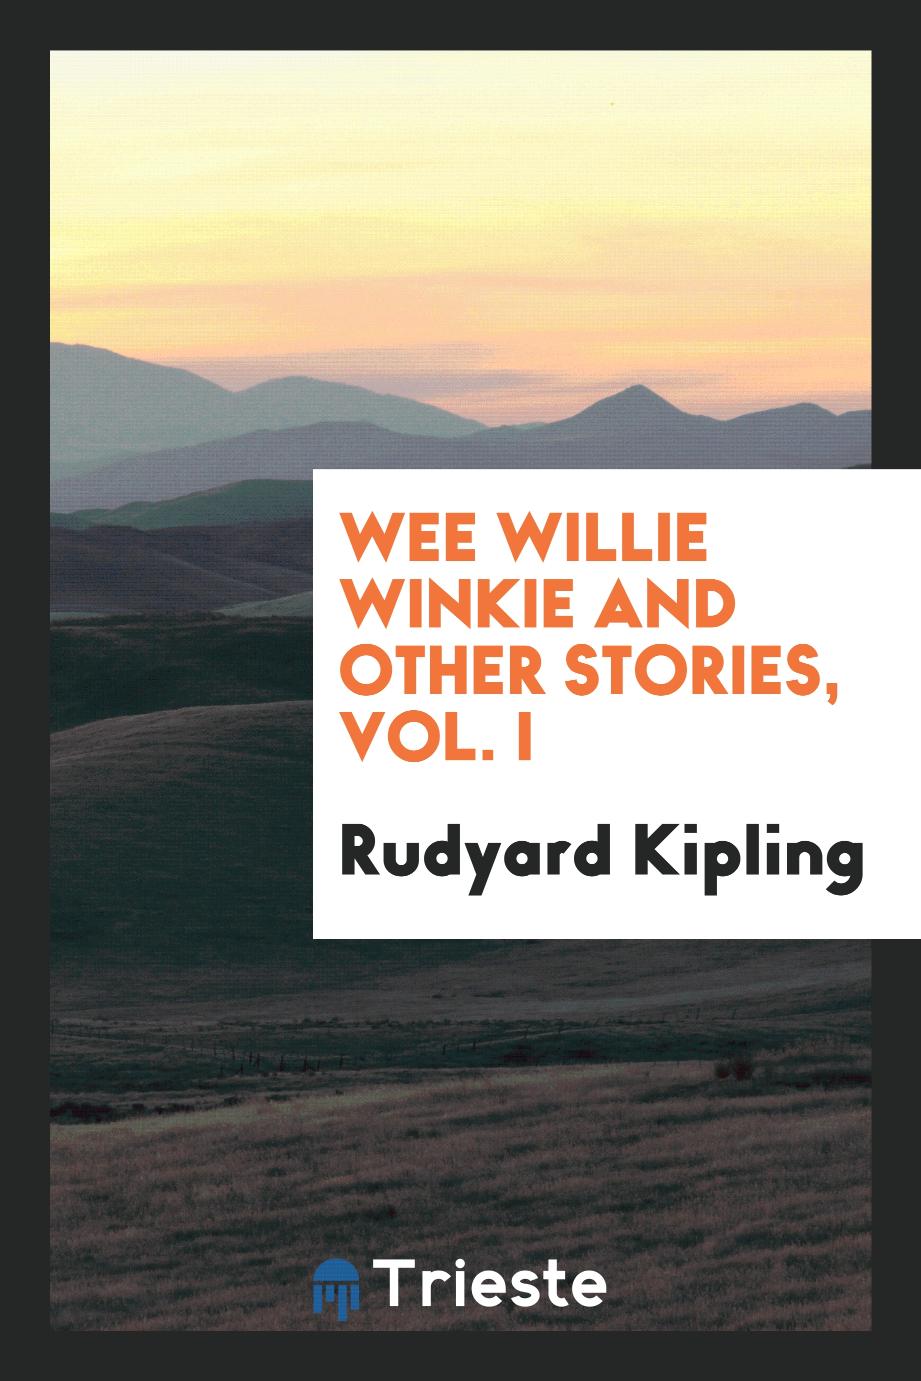 Wee Willie Winkie and other stories, Vol. I